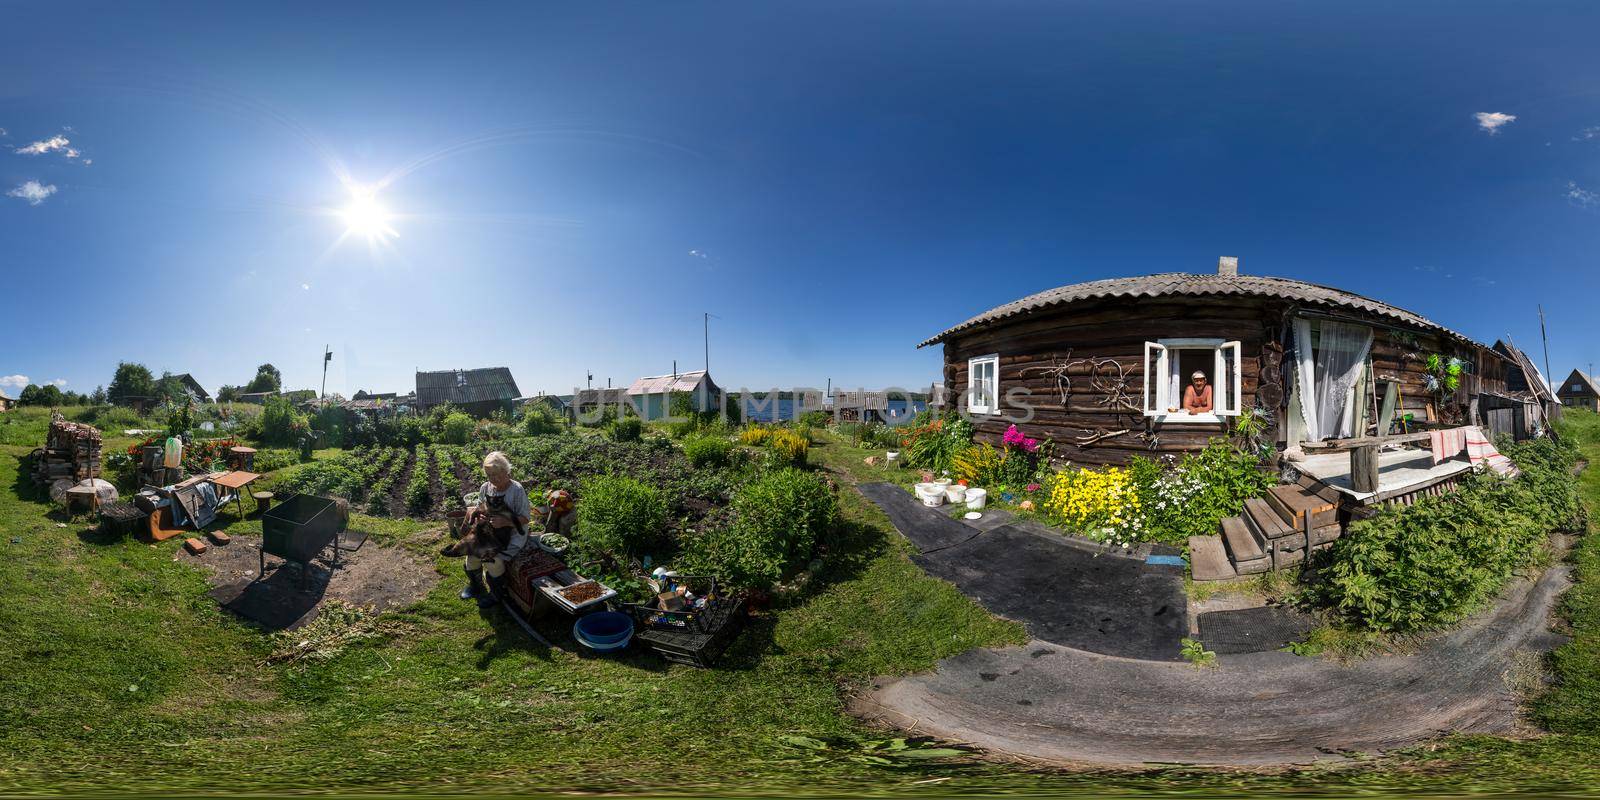 Seamless full spherical 360 degree panorama in equirectangular projection of rustic house with old man and woman with fat cat at summer day in Karelian Kondopoga, Russia - July 1, 2013